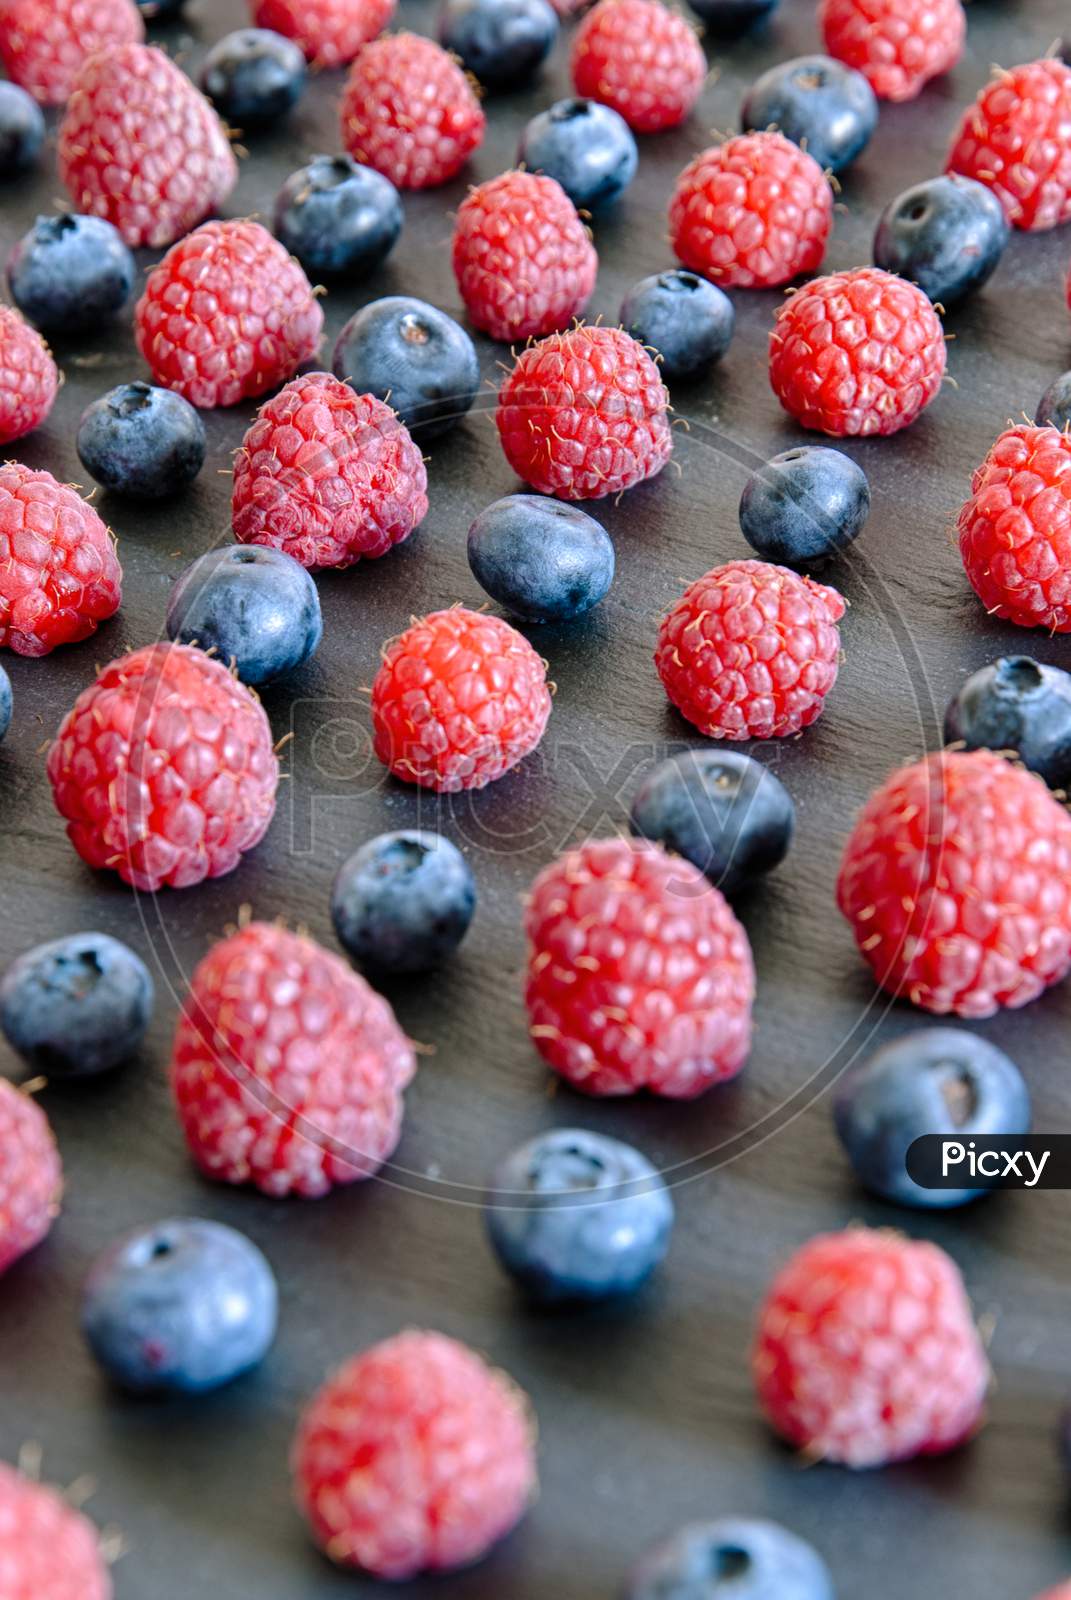 close up on raspberries and blueberries arranged as a pattern